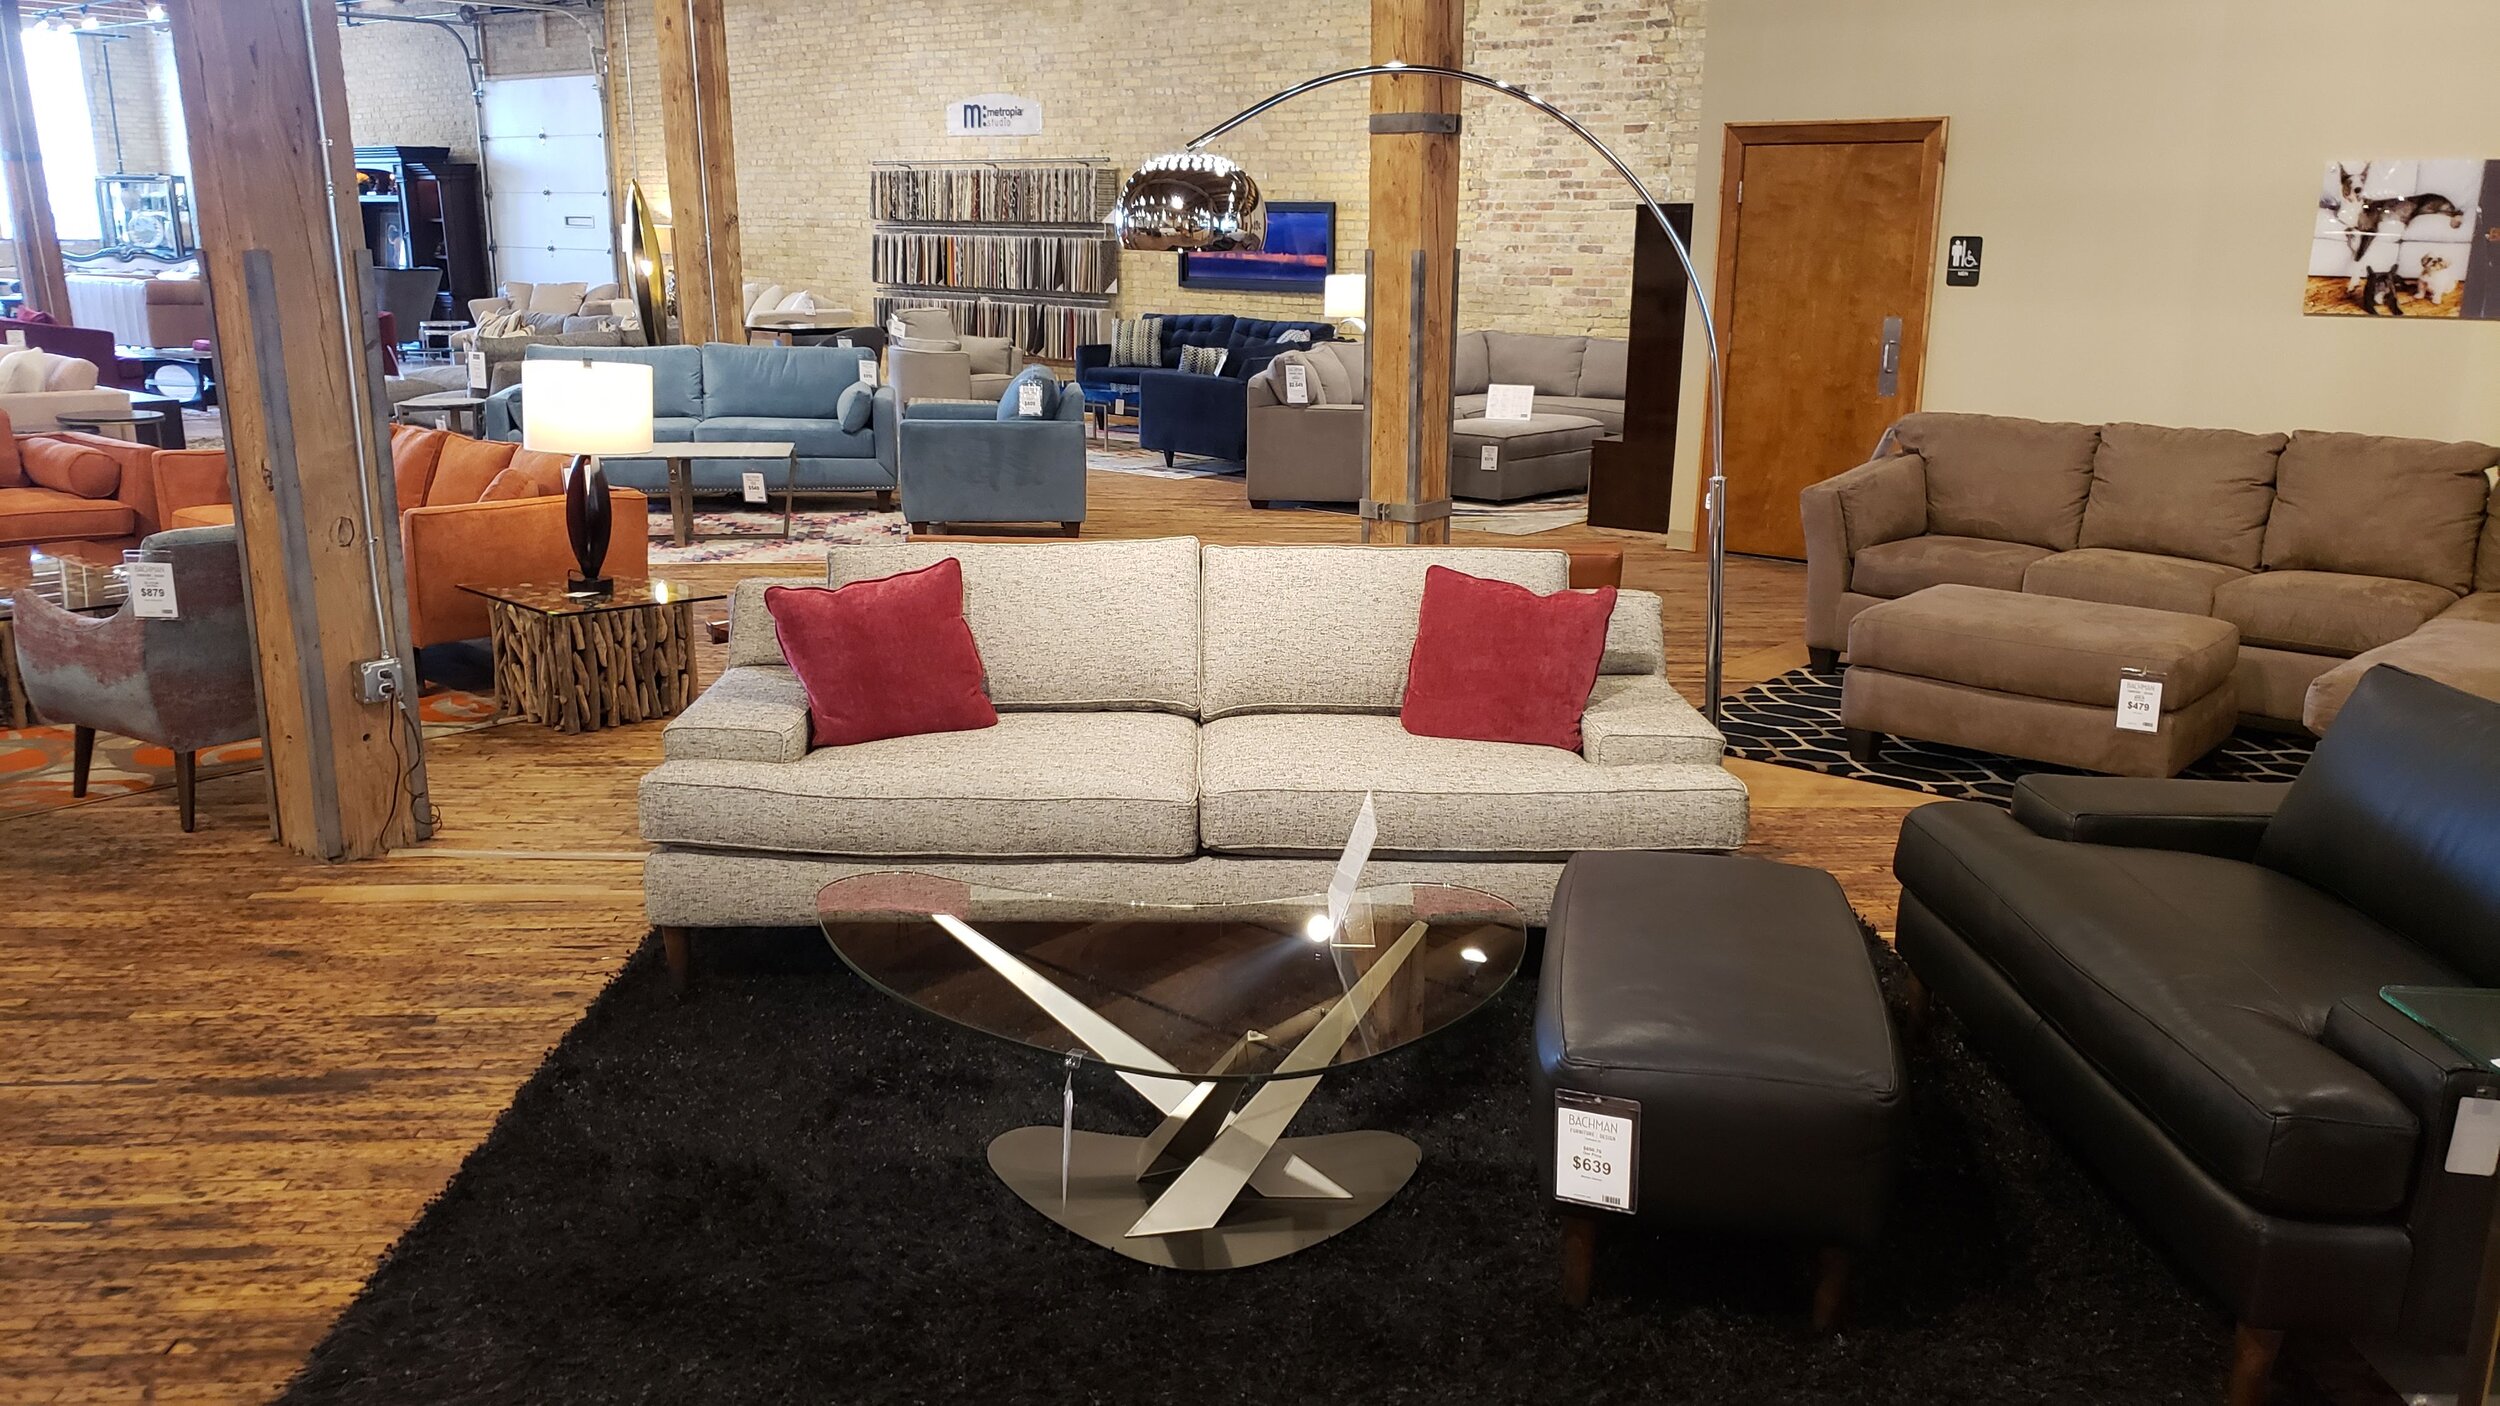   ST. PAUL AVE DESIGN DISTRICT   Furniture | Lighting | Stone | Antiques | Windows, Siding, Doors | Flooring | Cabinetry   Plan your visit  